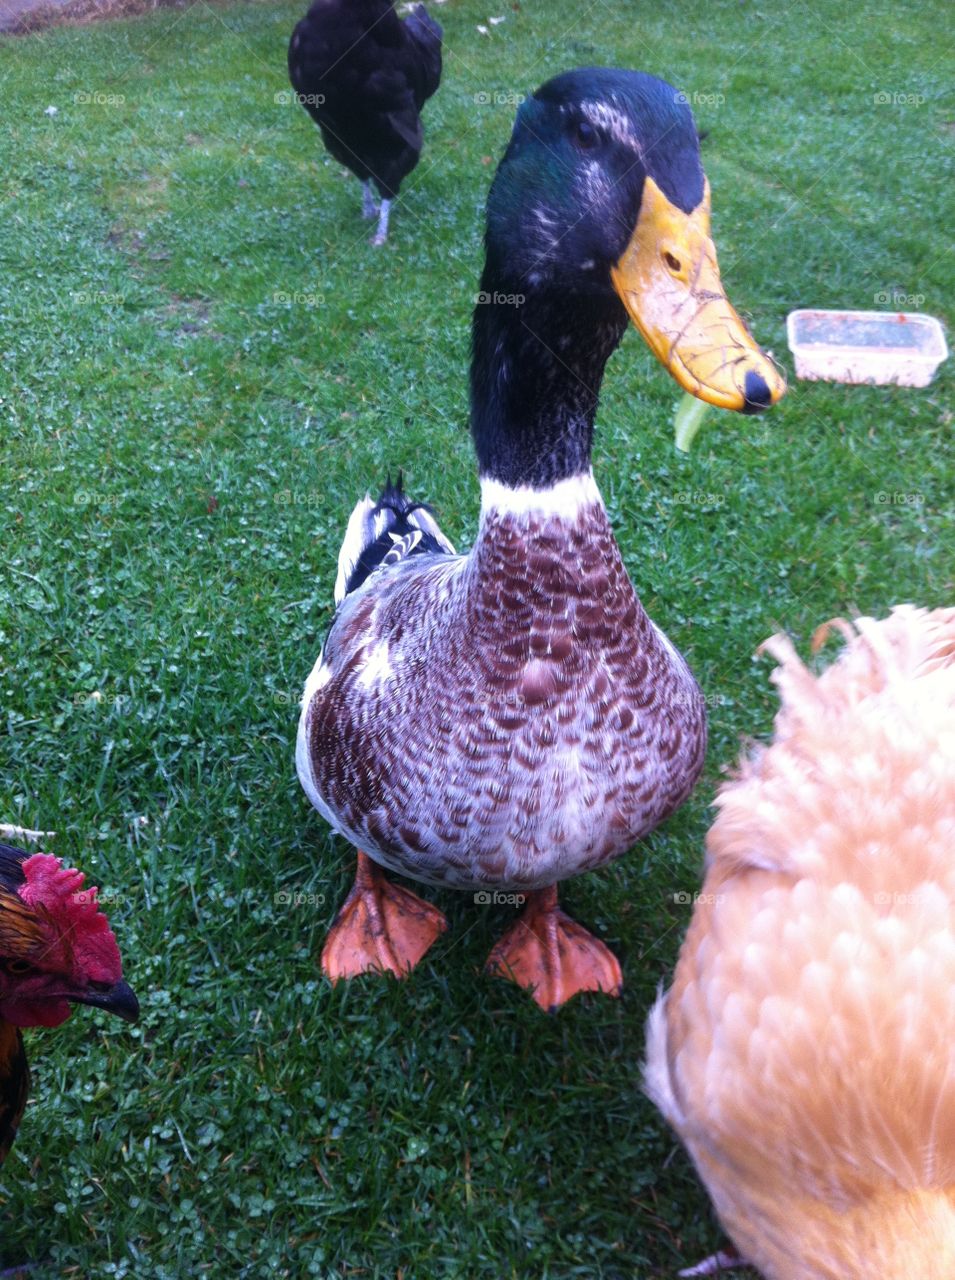 chester the duck